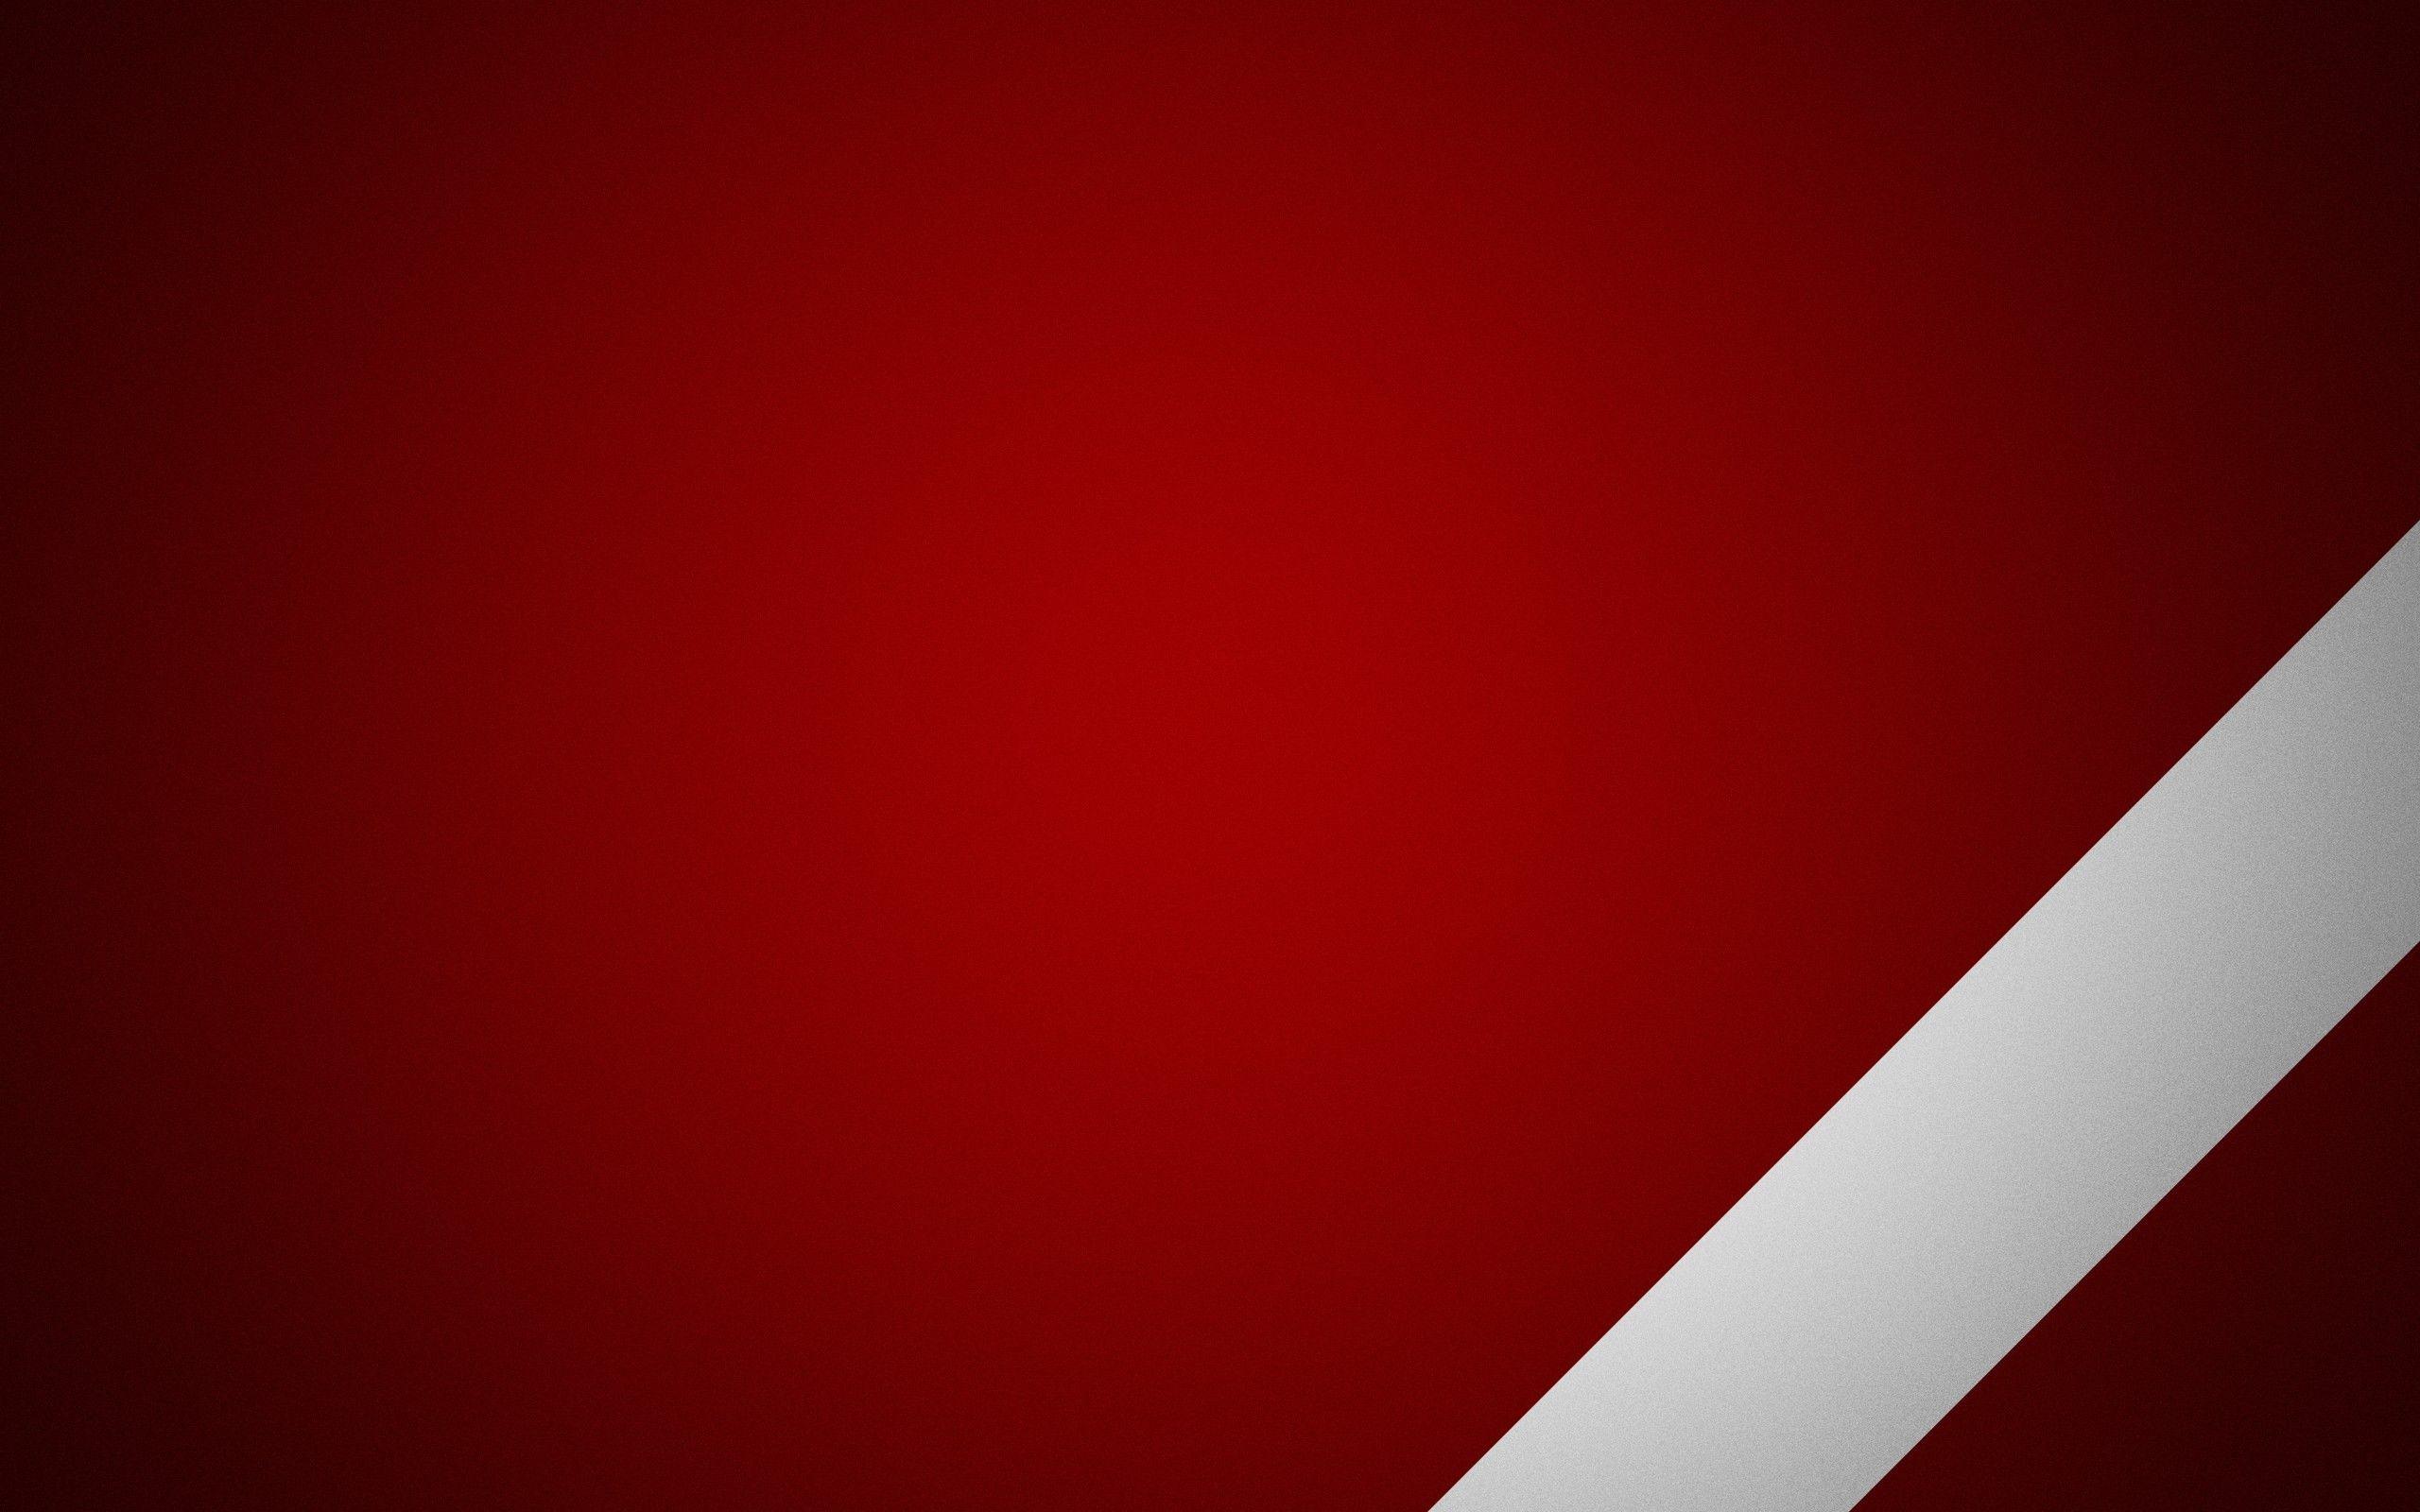 Wallpapers For > Red White And Blue Striped Wallpapers